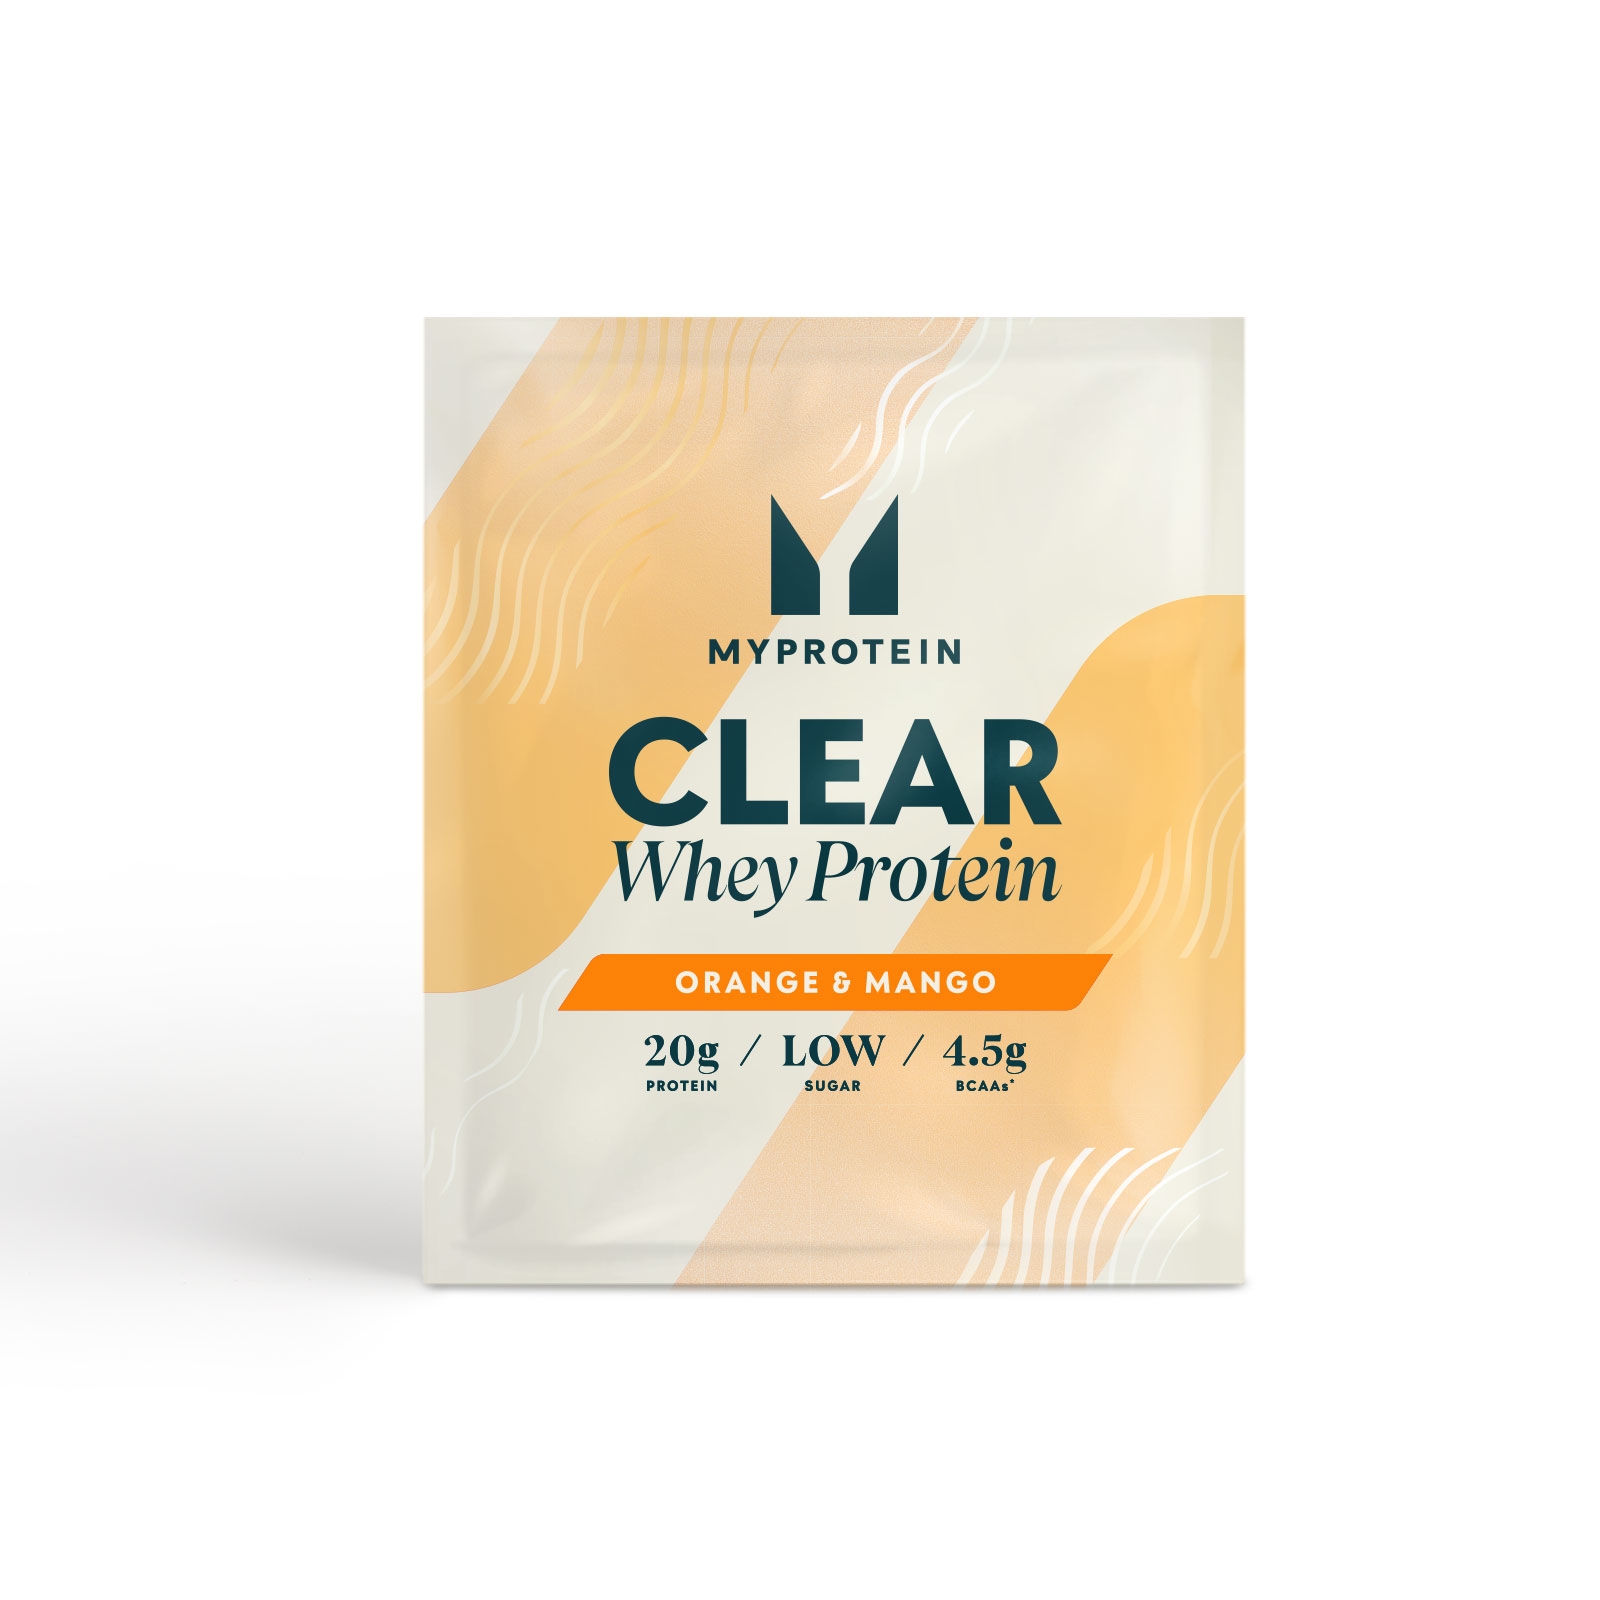 Myprotein Clear Whey Isolate (Sample) - 1servings - OranLarge Mango